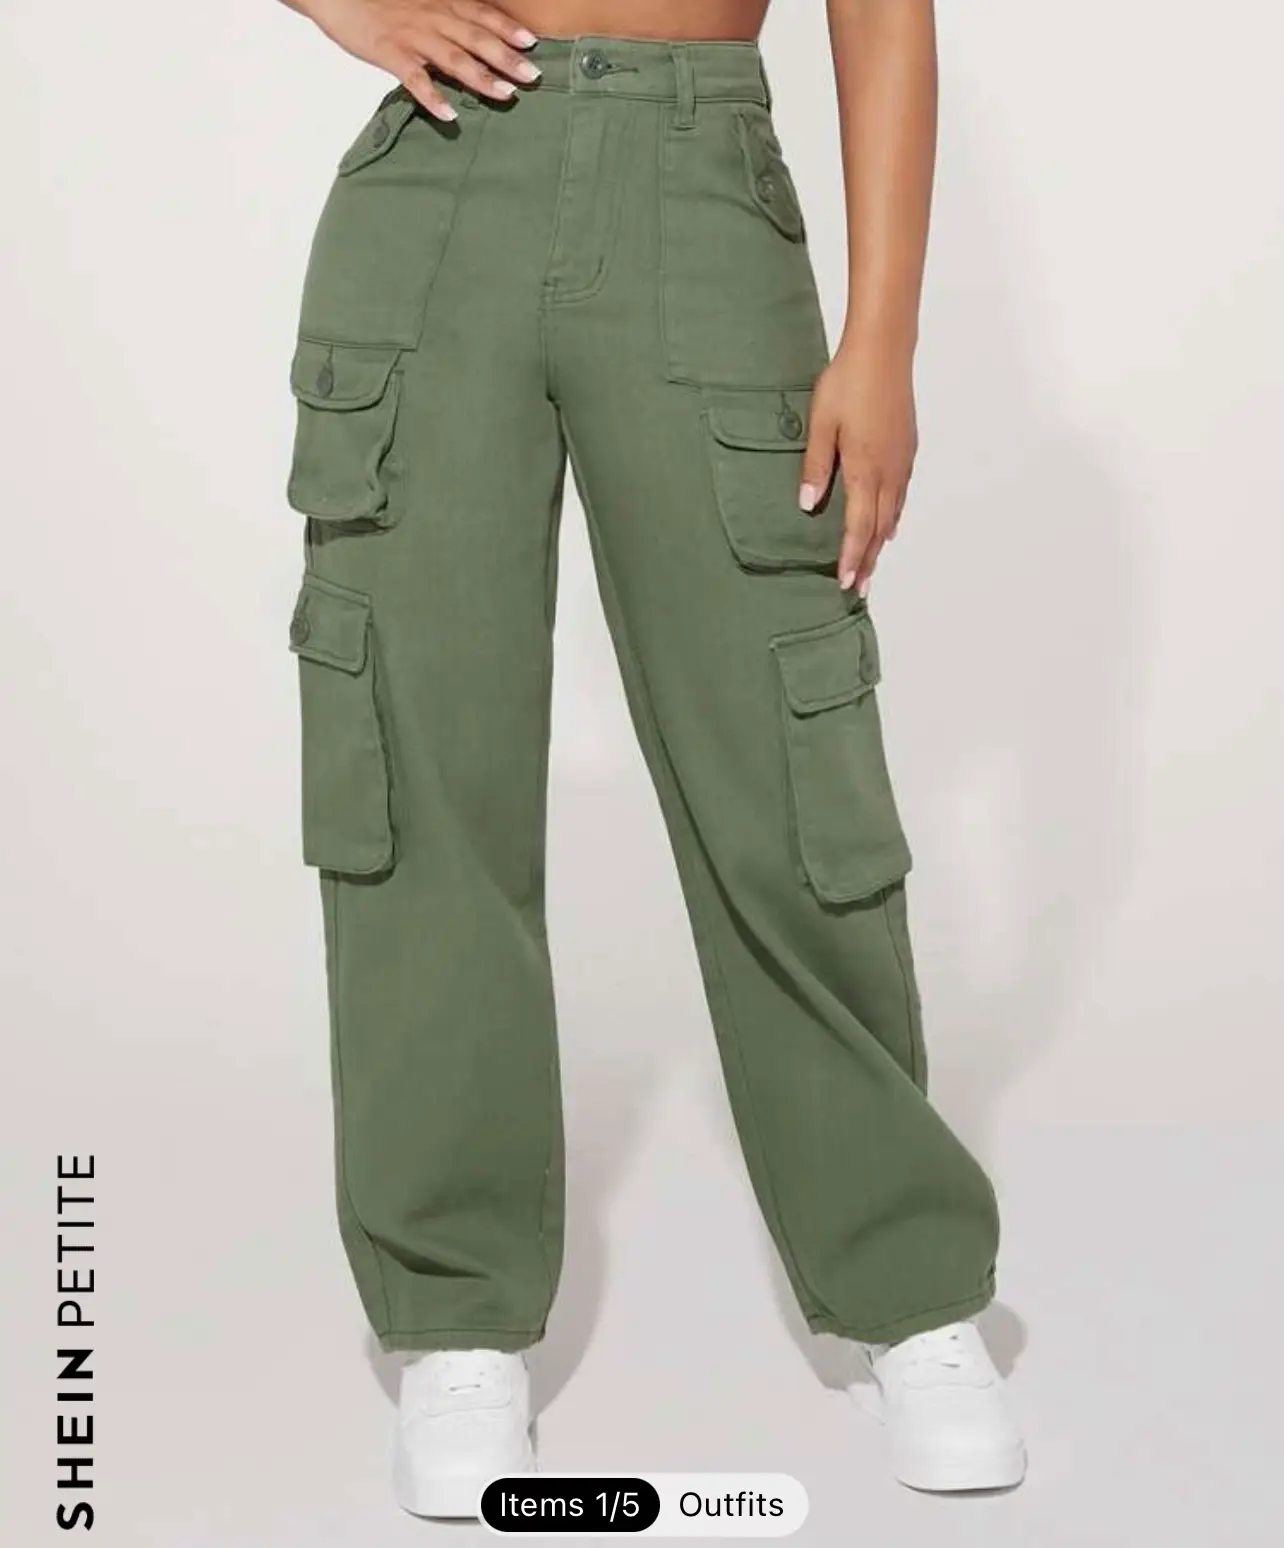 Shein cargos for petite women, Gallery posted by Rocky